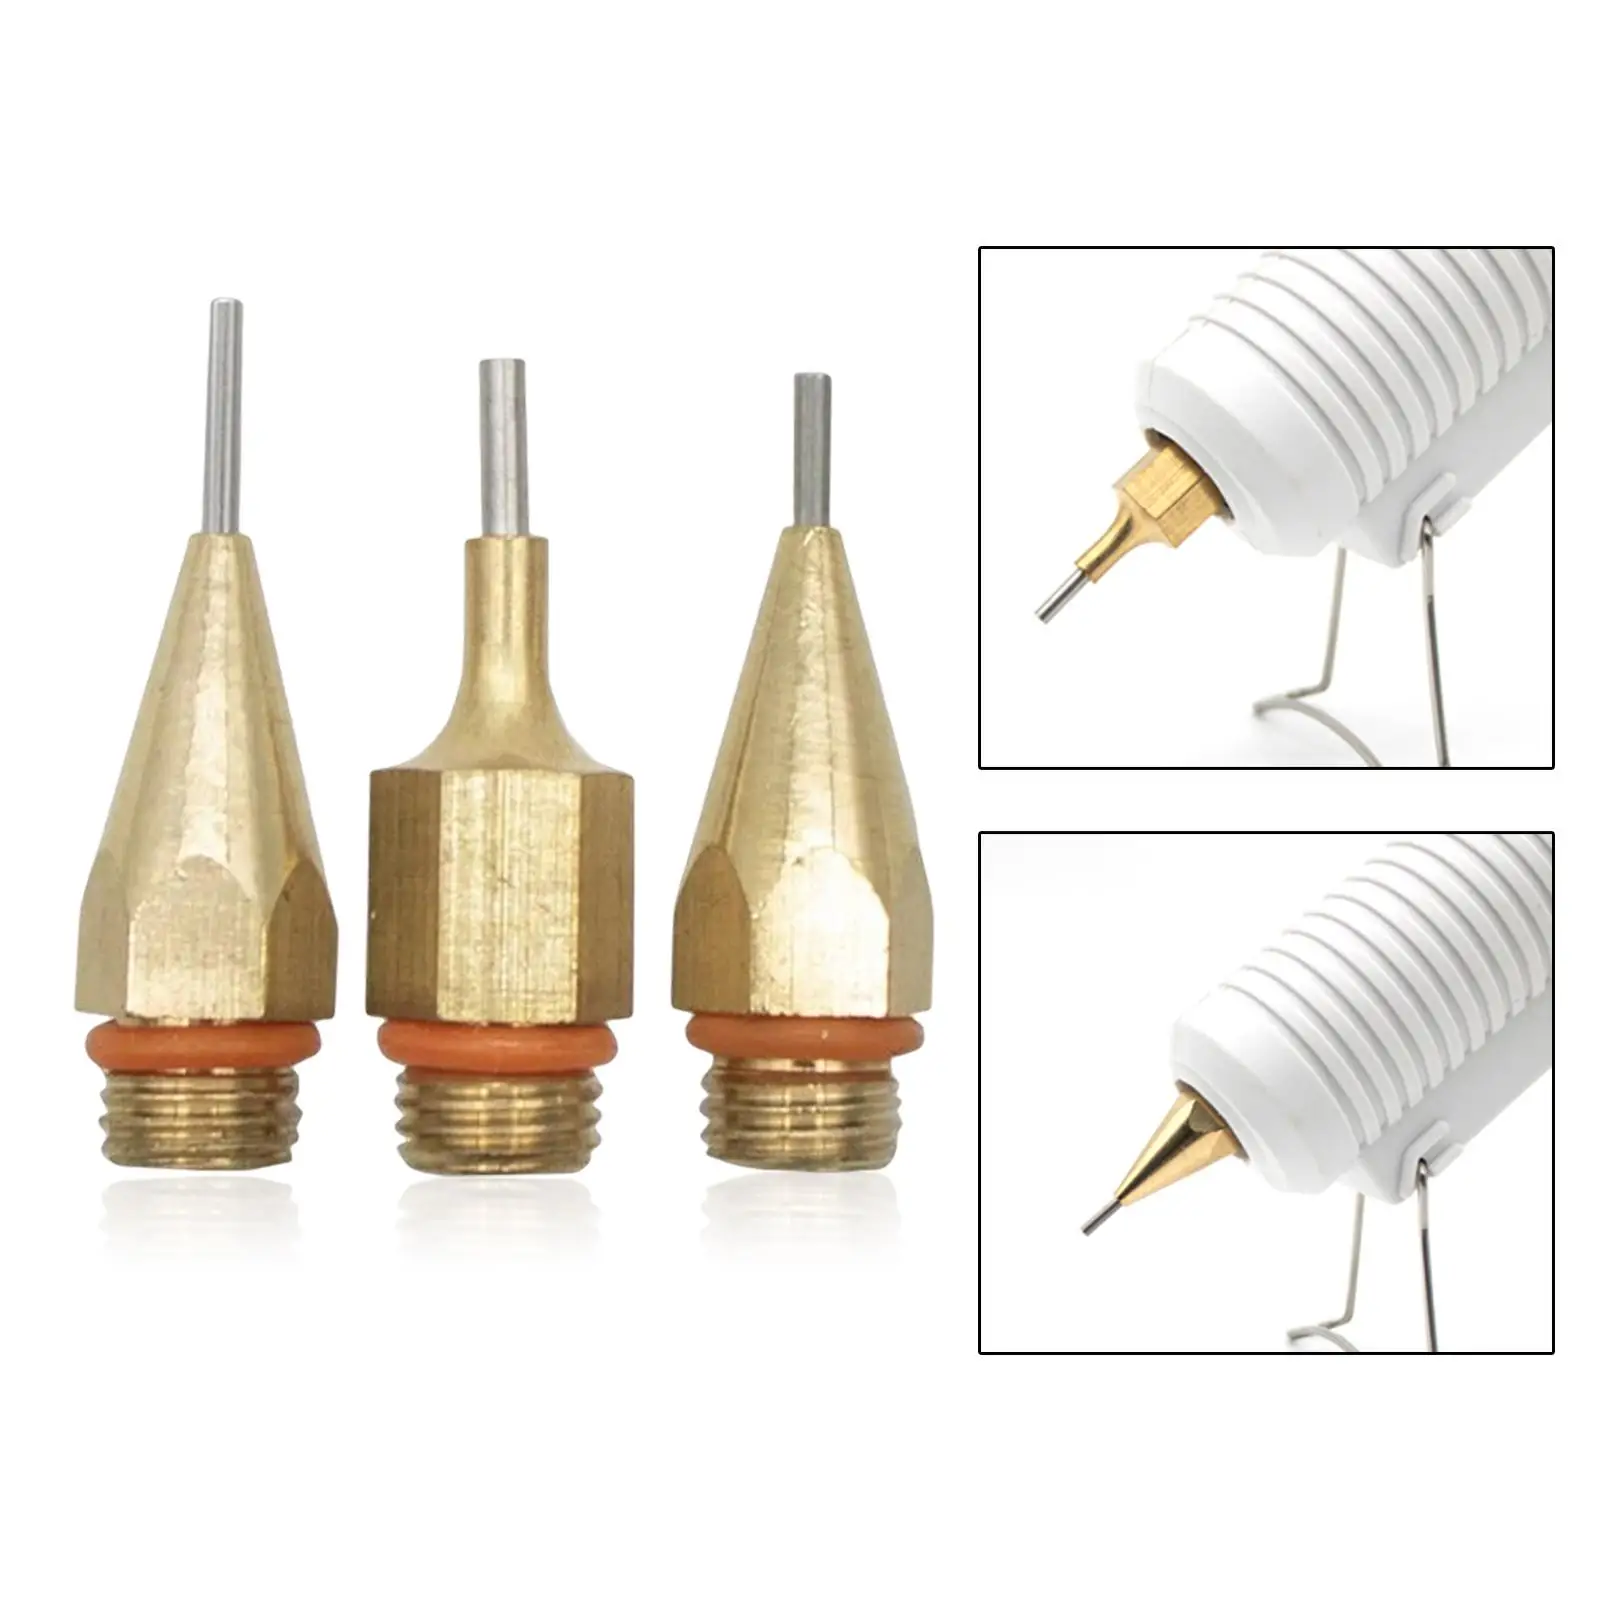 3 Pieces Hot Glue Tool Nozzles Glue Tool Accessories Melting Glue Tool Use Copper Nozzles Craft Repair Tool Stainless Steel